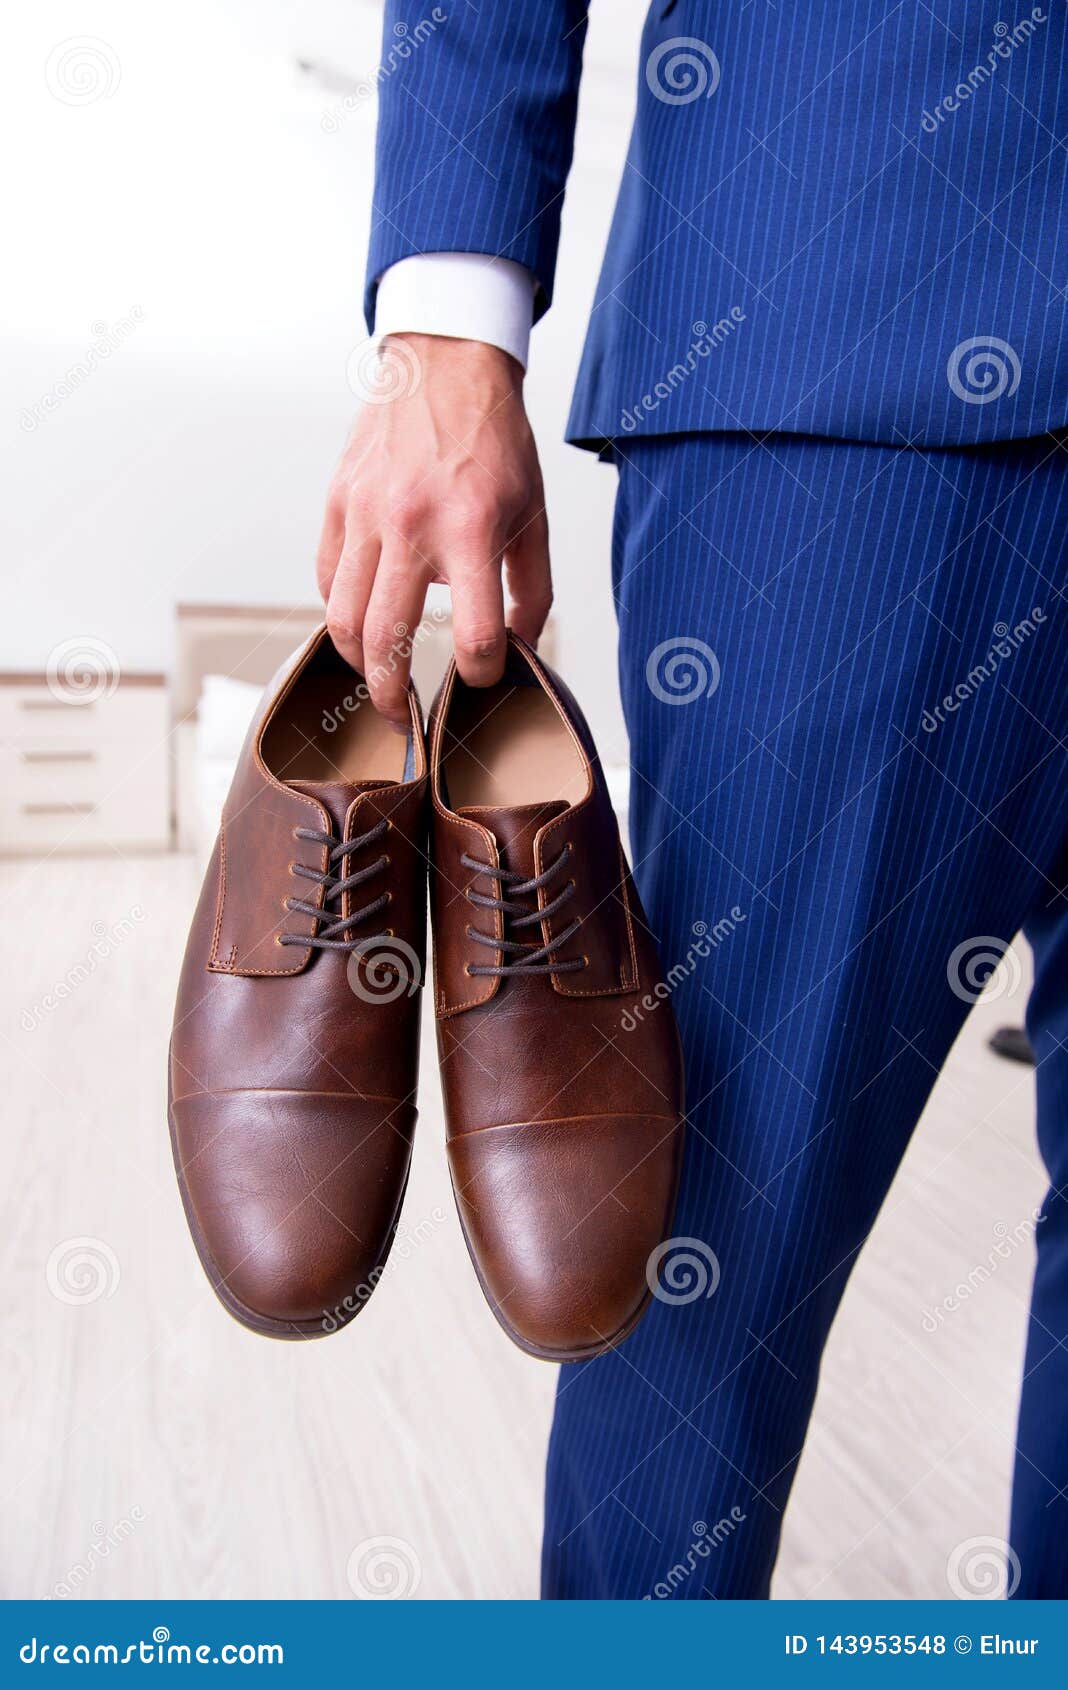 The Young Handsome Businessman Choosing Shoes at Home Stock Photo ...